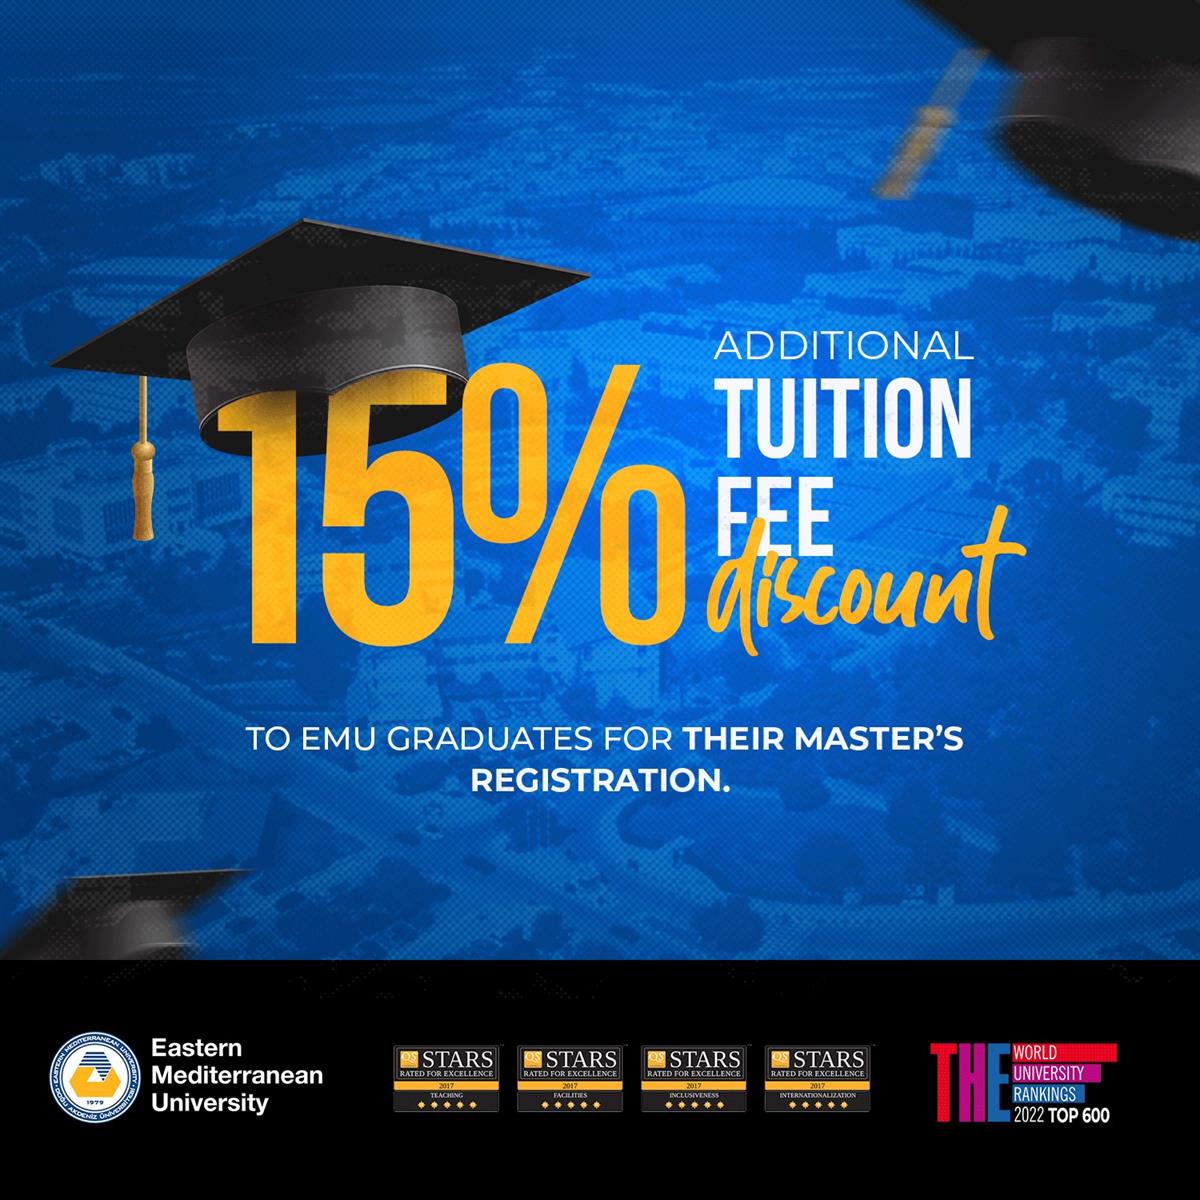 Eastern Mediterranean University Offers Extra Tuition Fee Discount of 15% to its Graduates on Master’s Program Freshmen Registrations